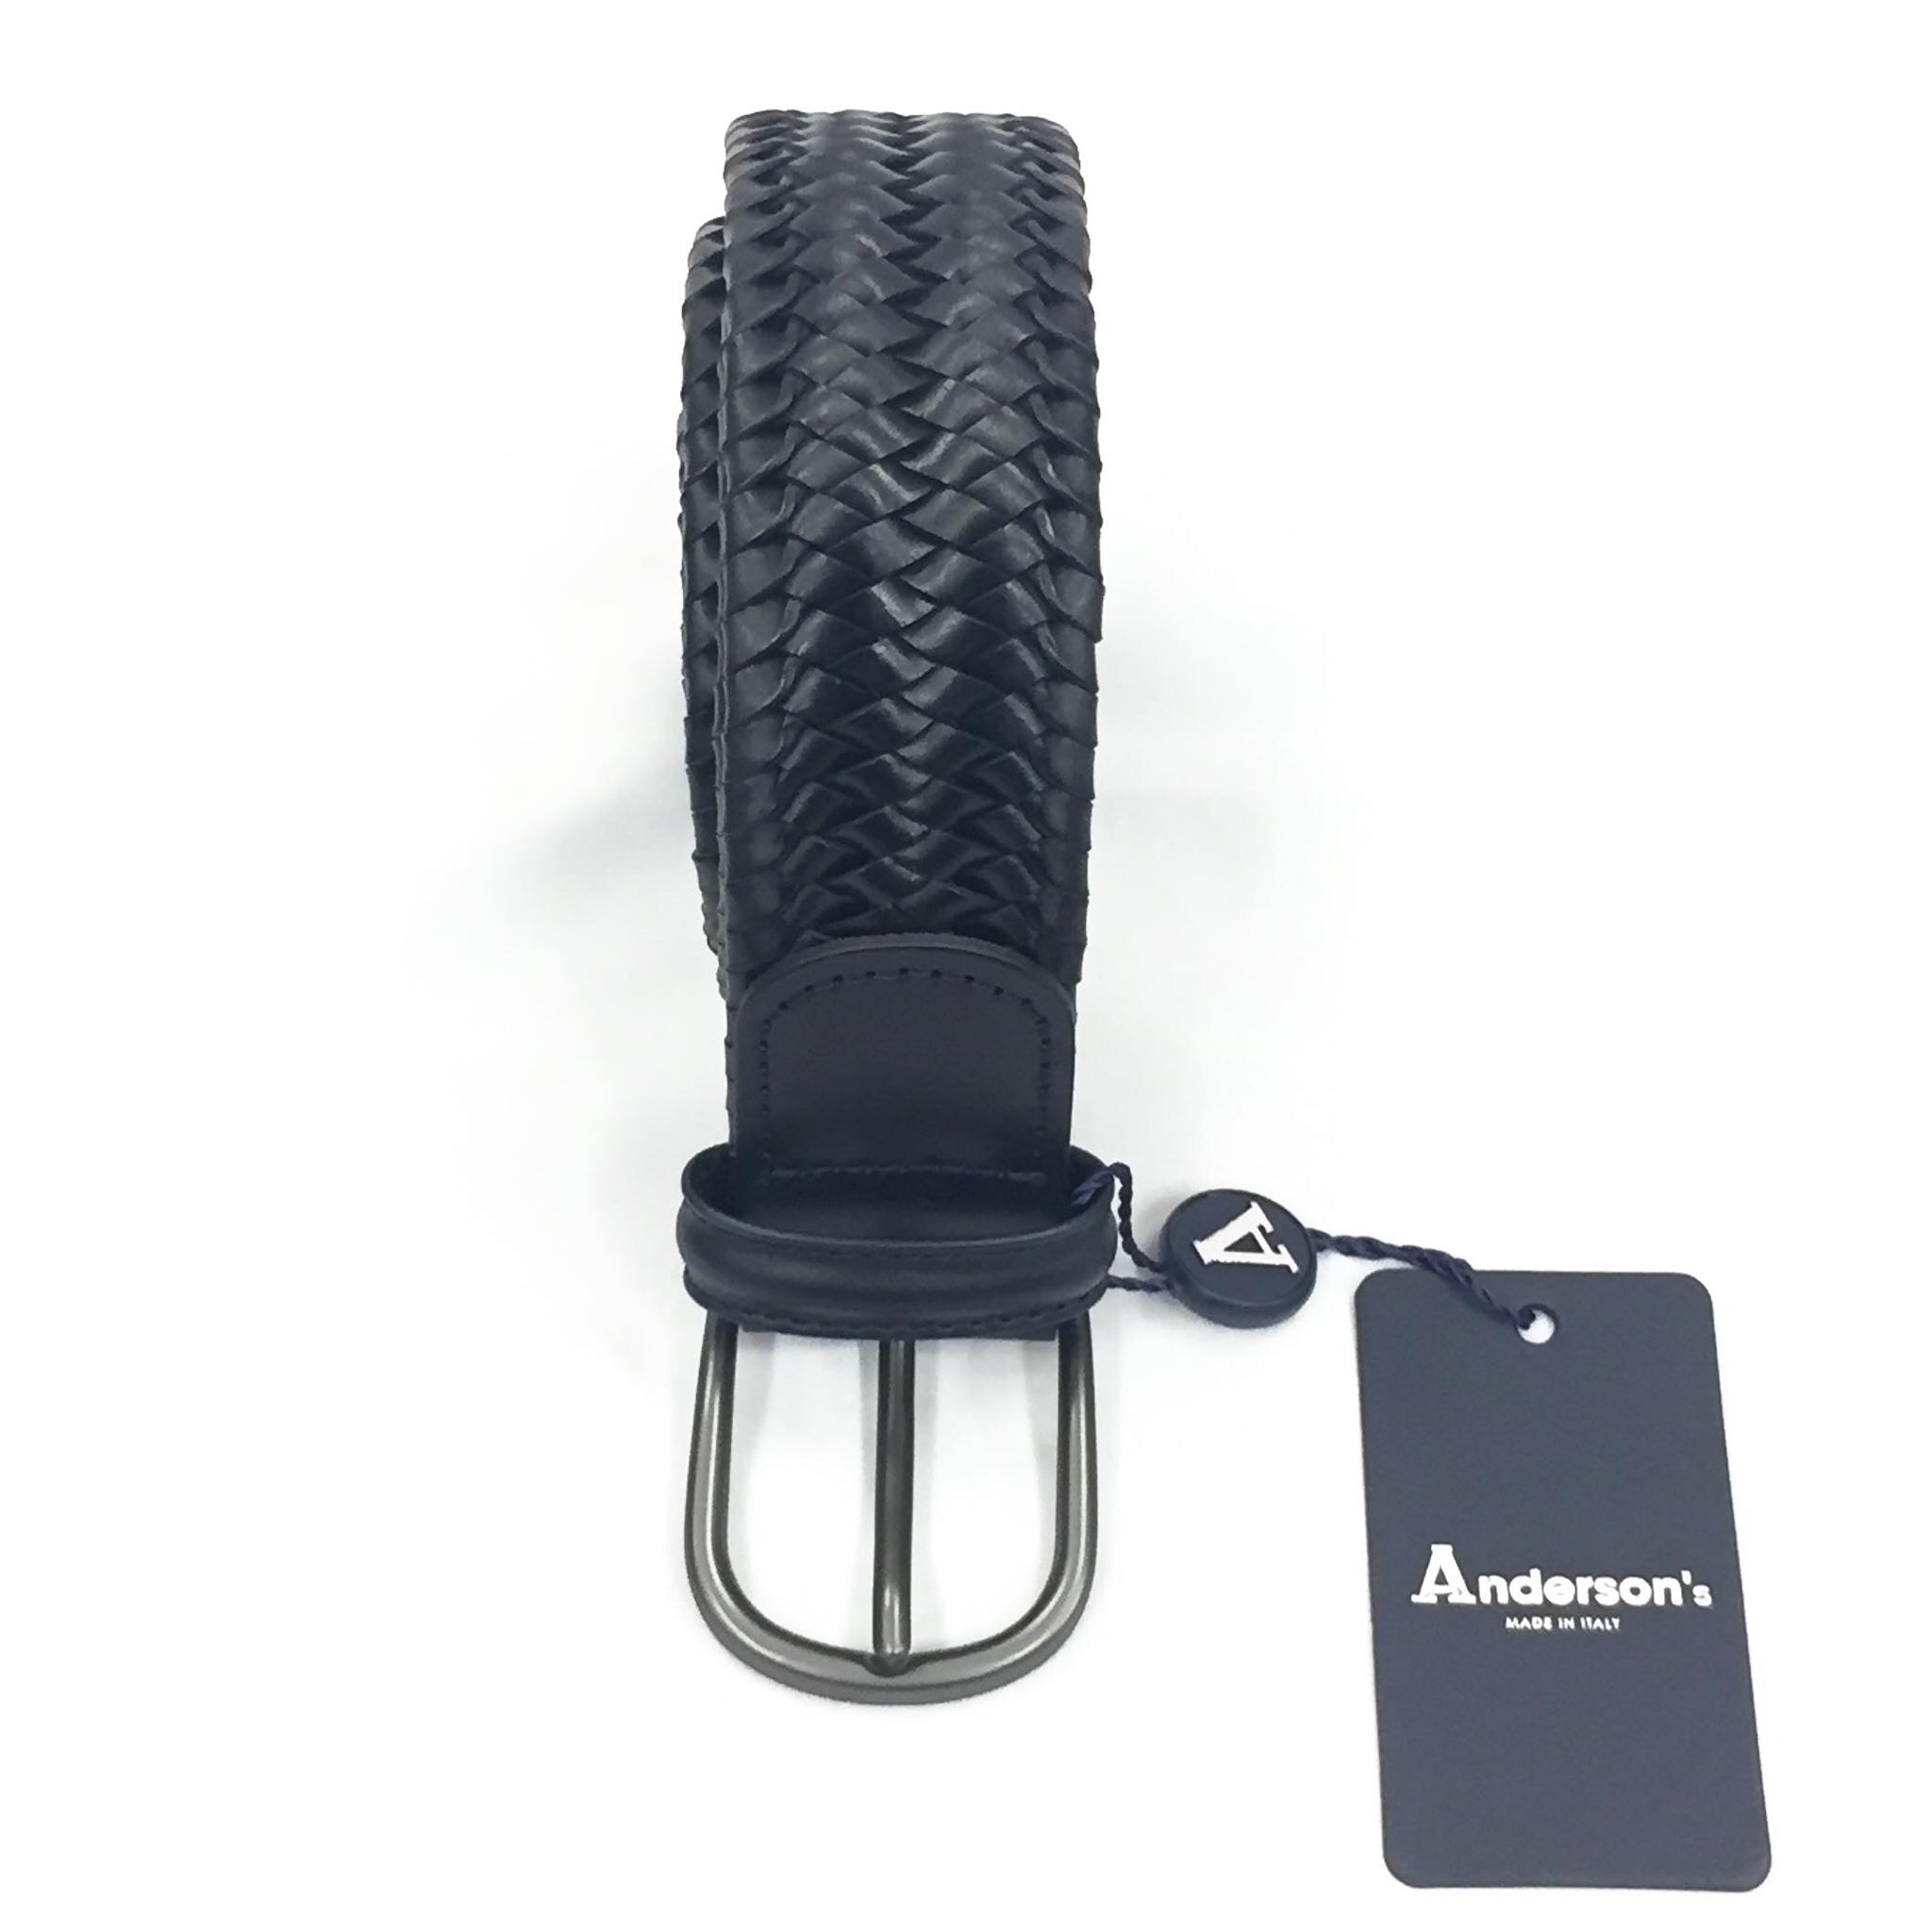 ANDERSON'S STRETCH WOVEN LEATHER BELT - NAVY